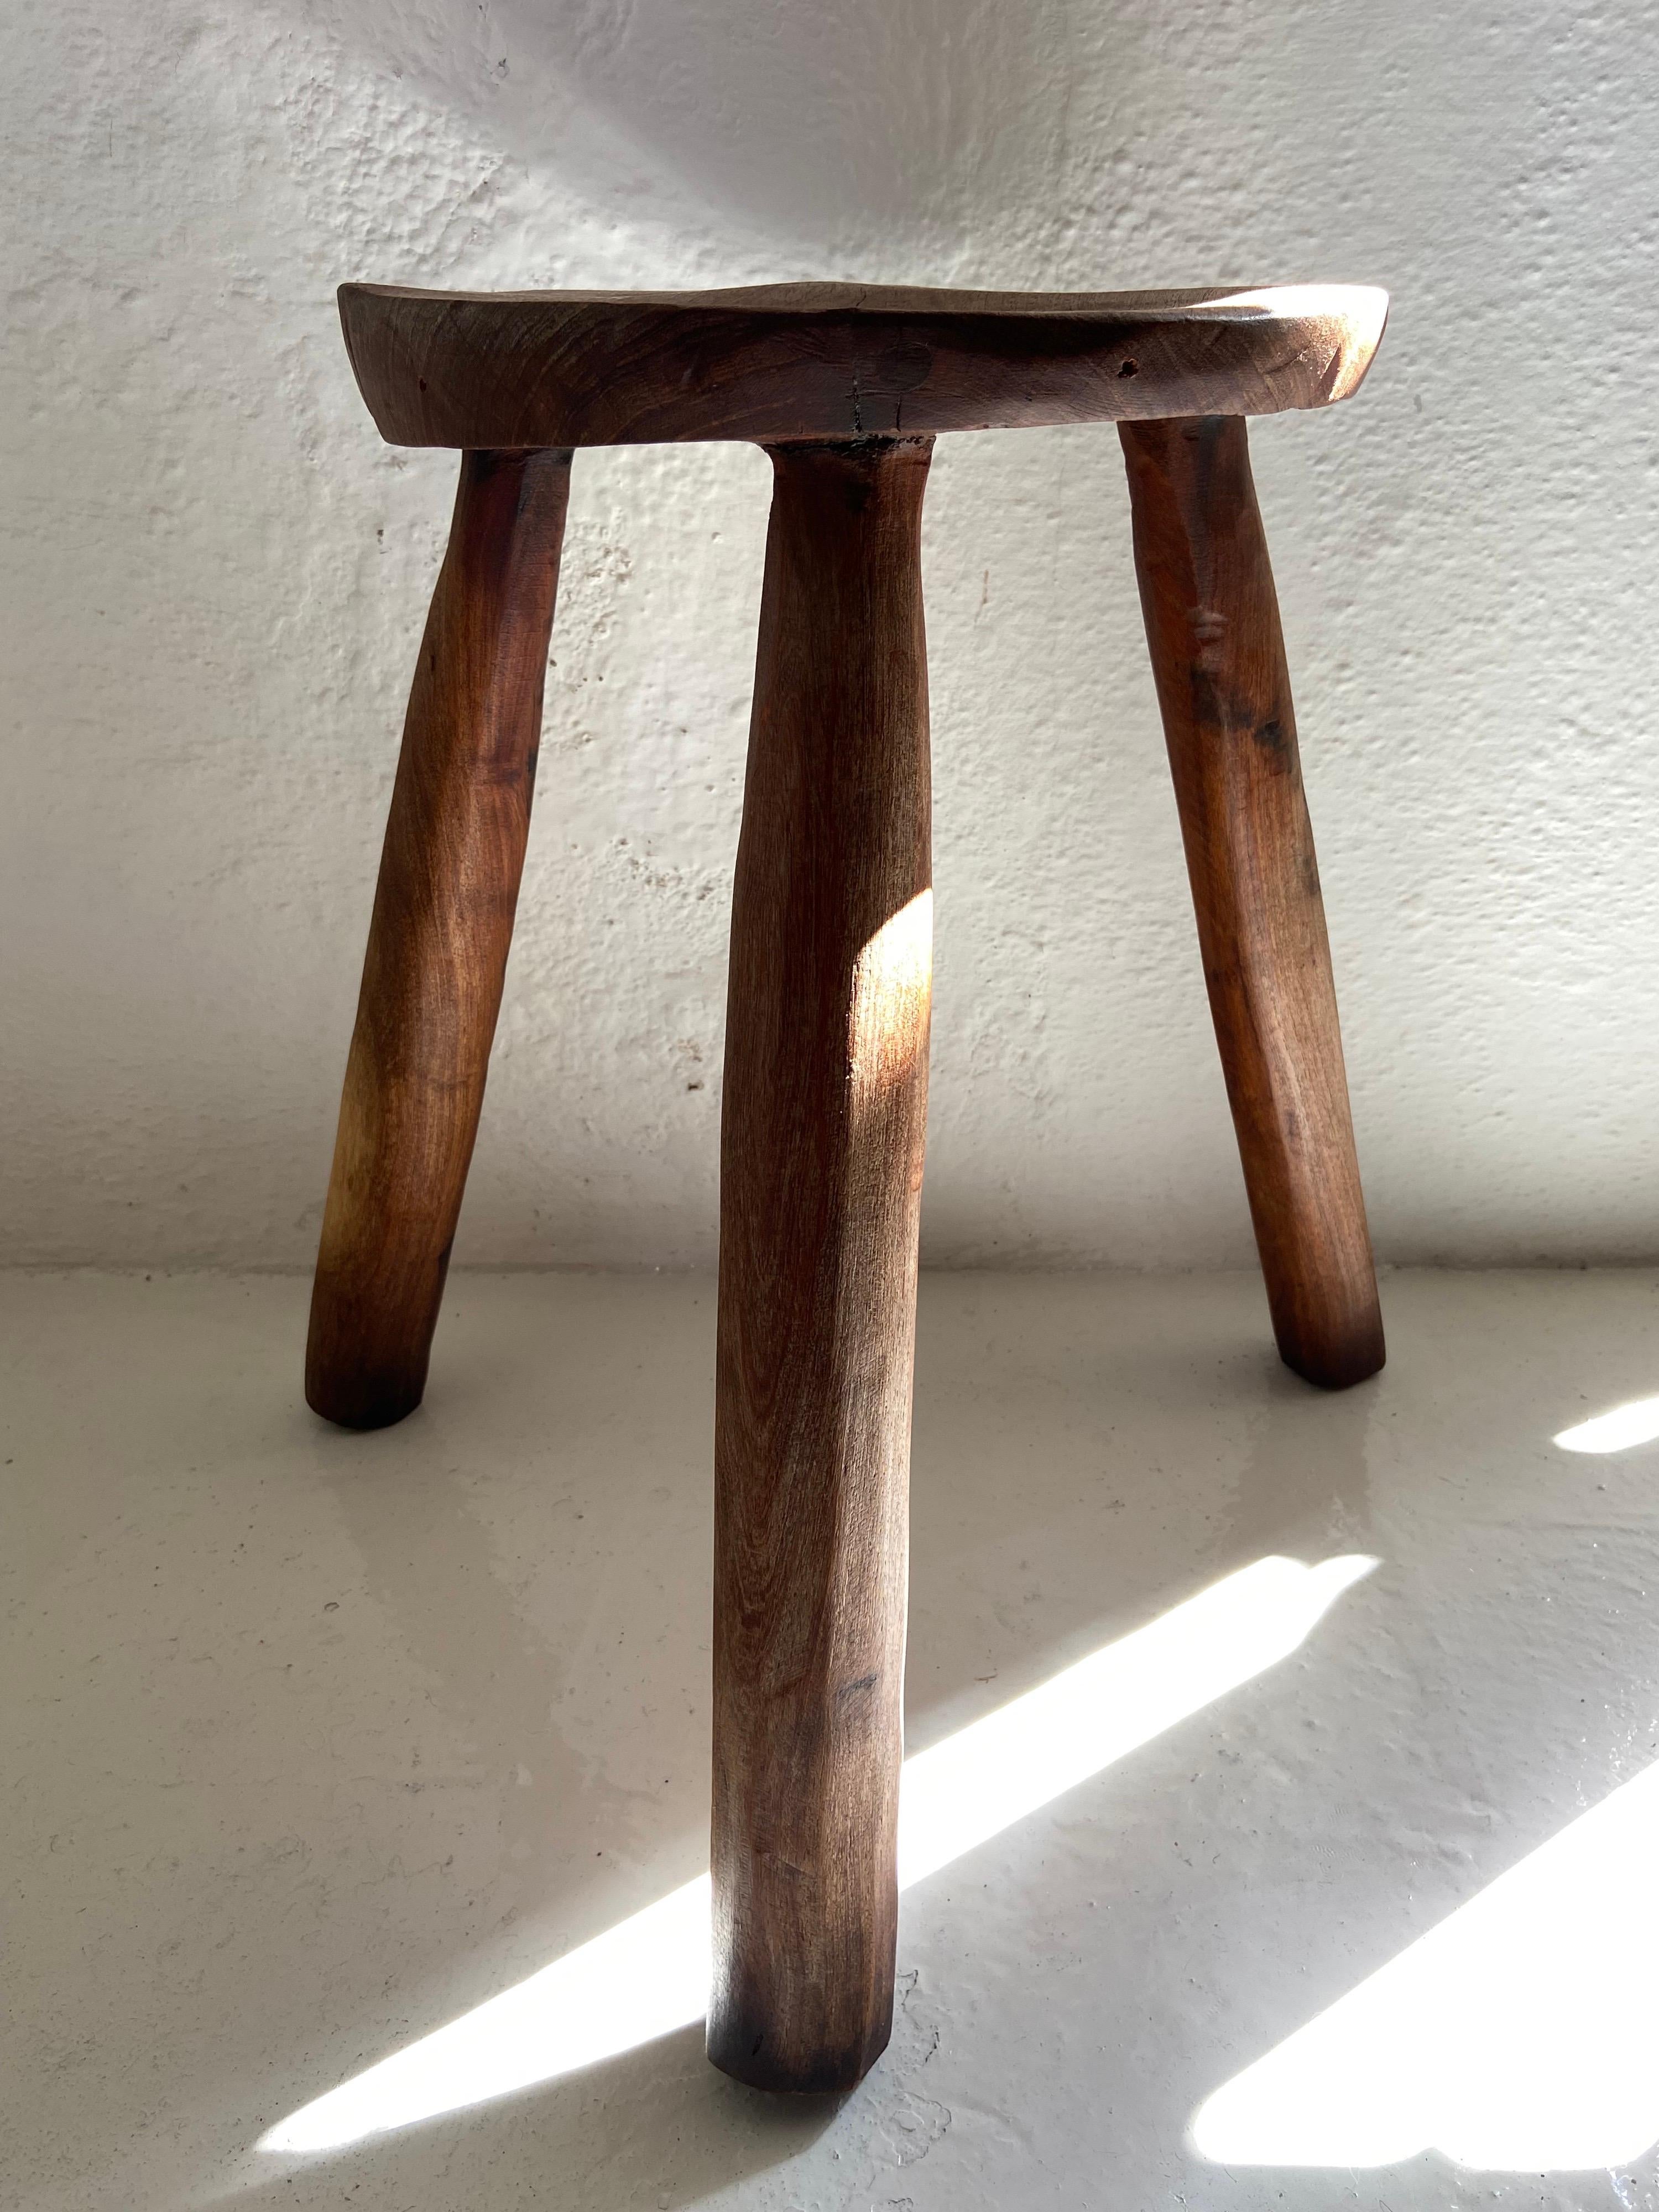 Hand carved, mesquite hardwood stool from Guanajuato, Mexico, circa 1970´s. Measure: Leg splay 19